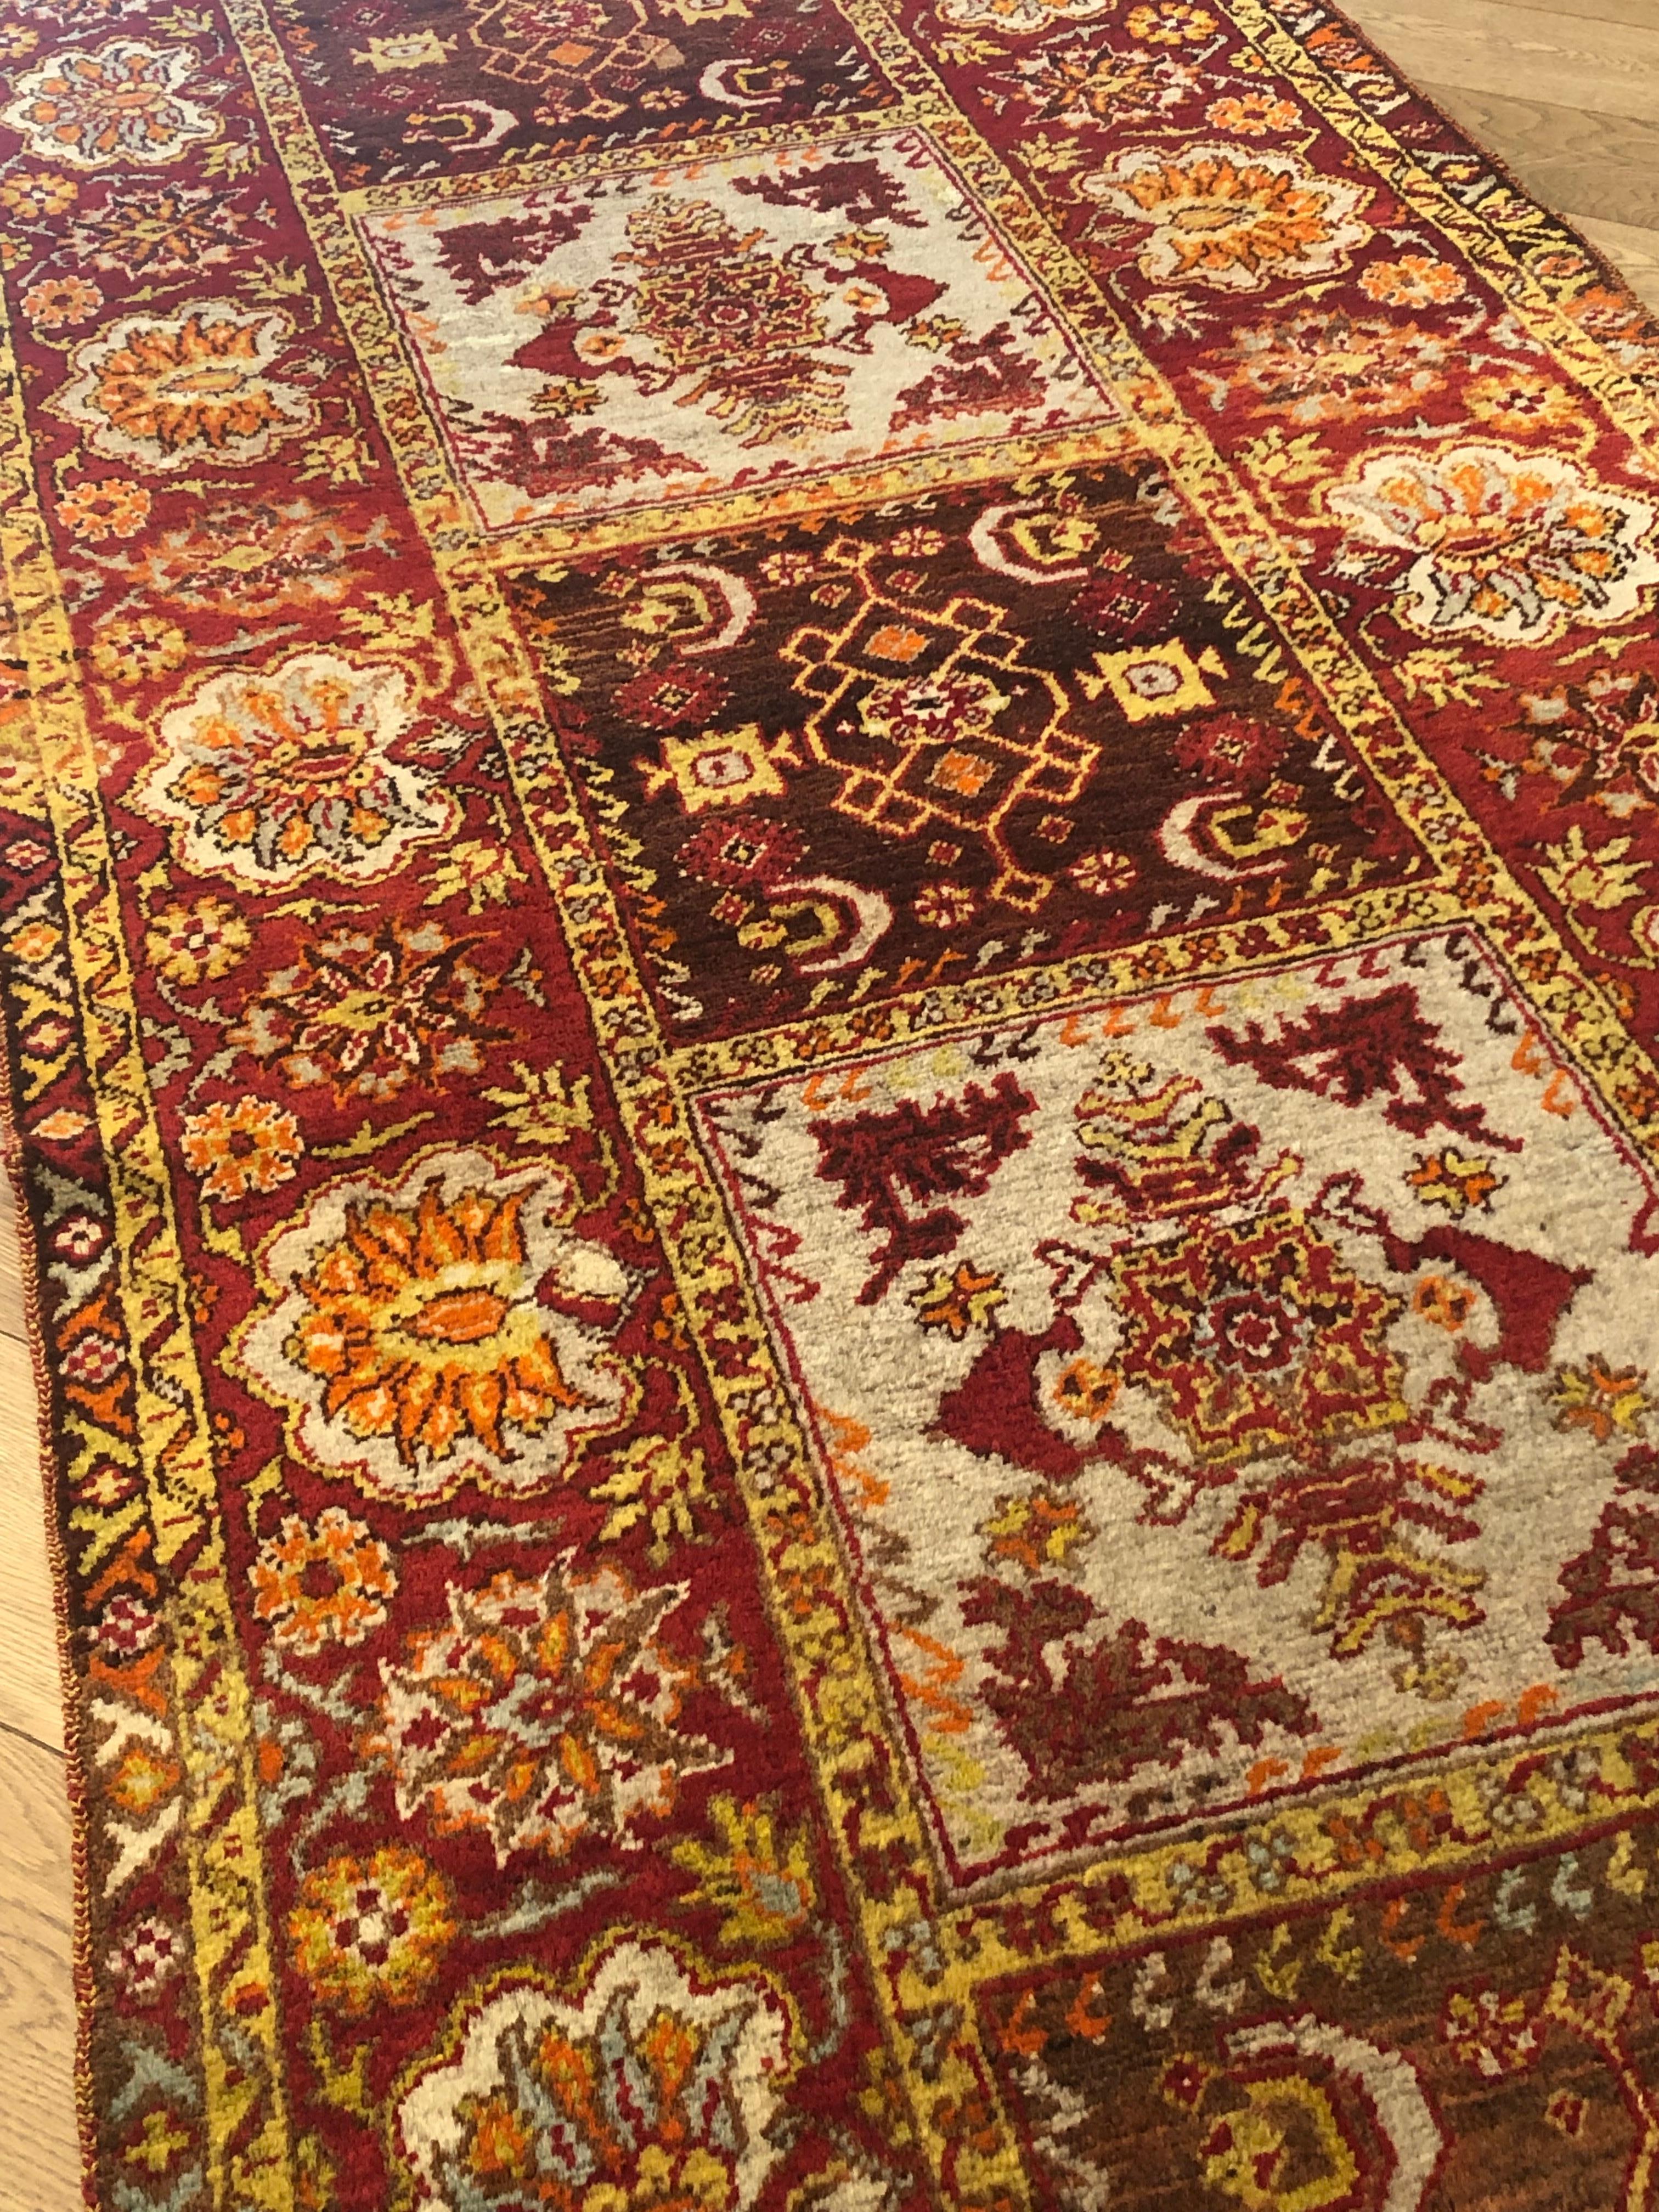 20th Century Anatolian Earth Colours Brown Red Yellow Anatolian Rug, ca 1920 For Sale 1